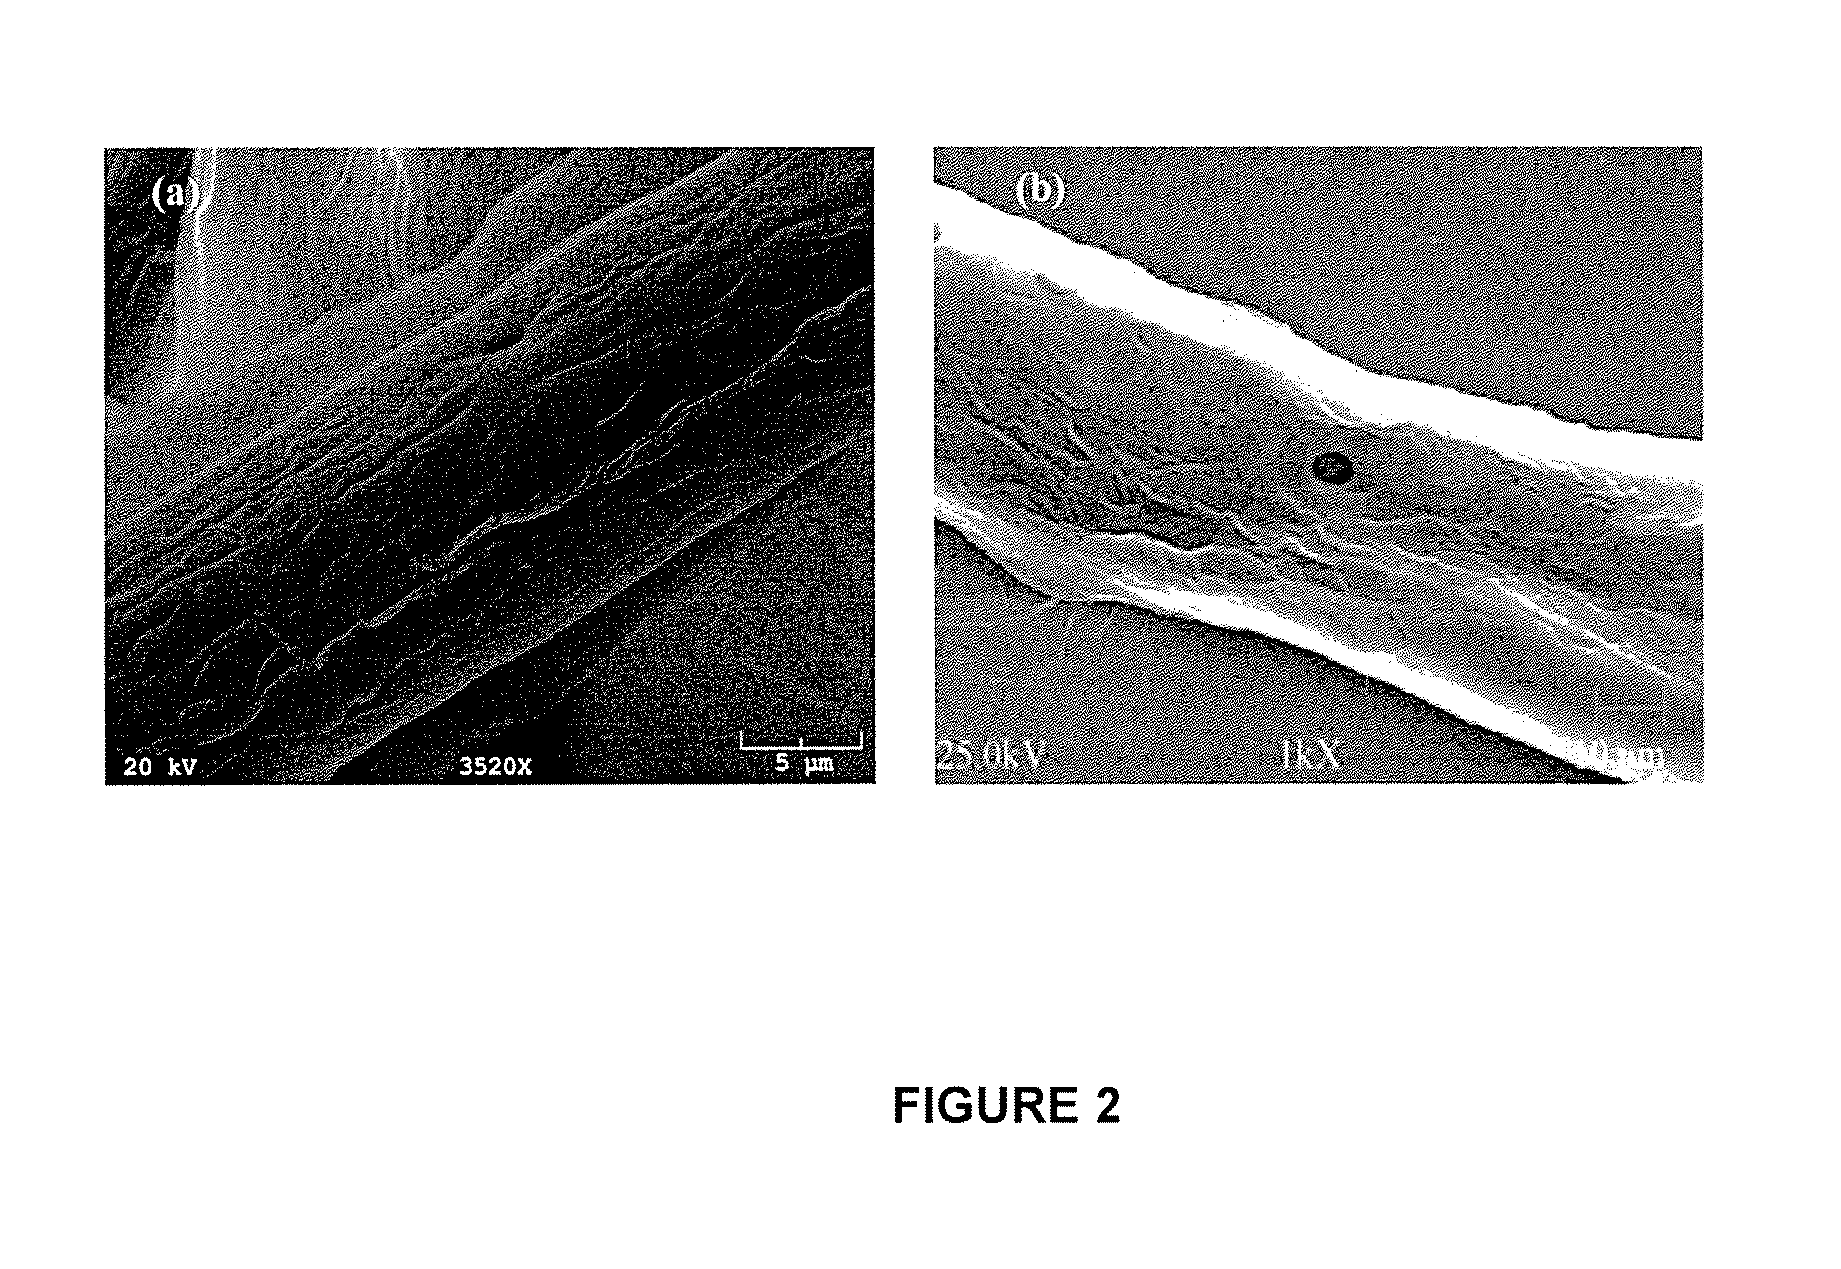 Method for the manufacture of smart paper and smart wood microfibers